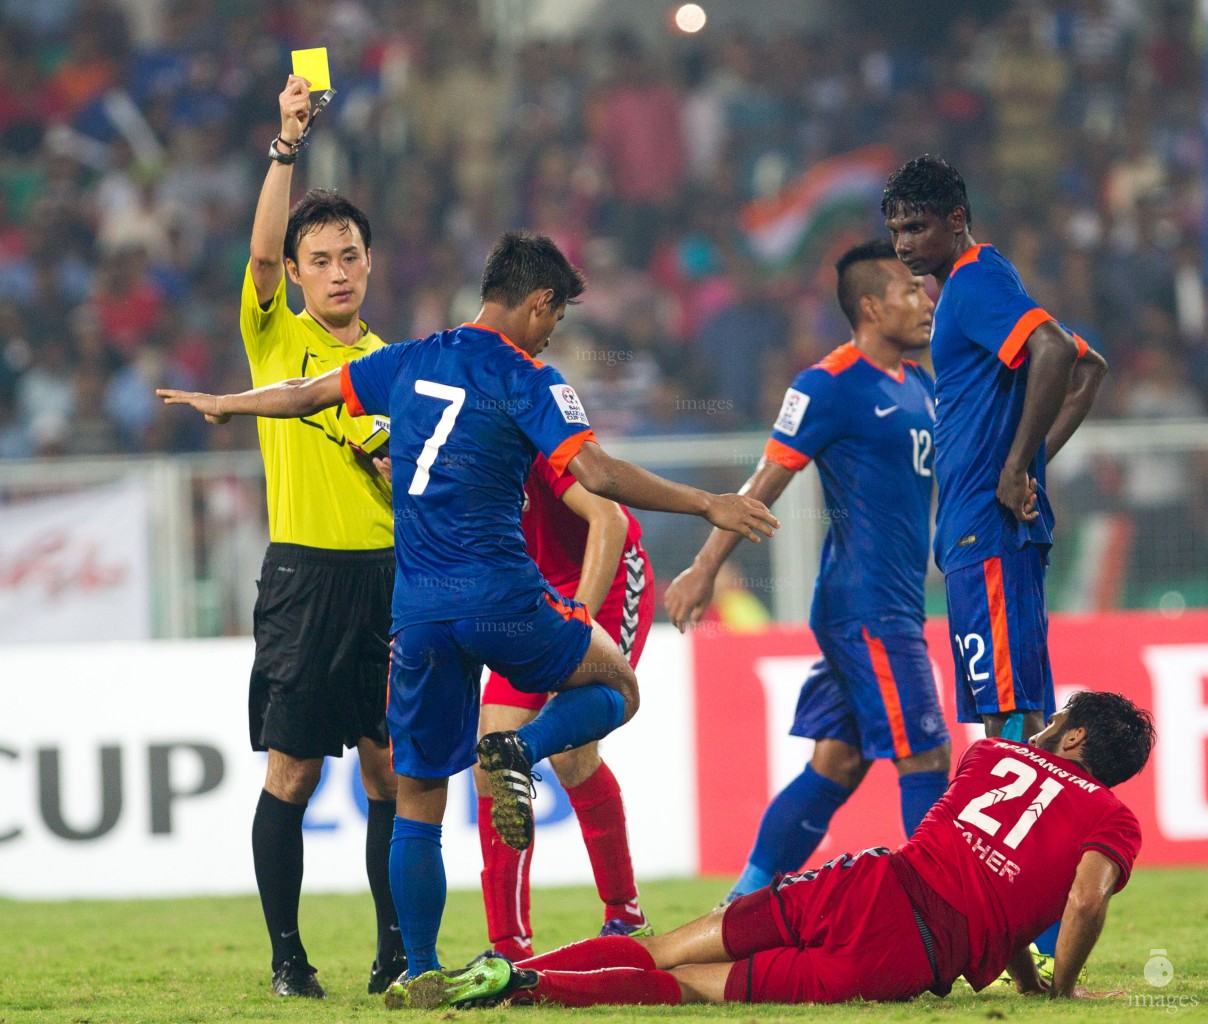 India vs Afghanistan in the final of SAFF Suzuki Cup held in Thiruvananthapuram, India, Sunday, January. 03, 2015.  (Images.mv Photo/ Mohamed Ahsan).